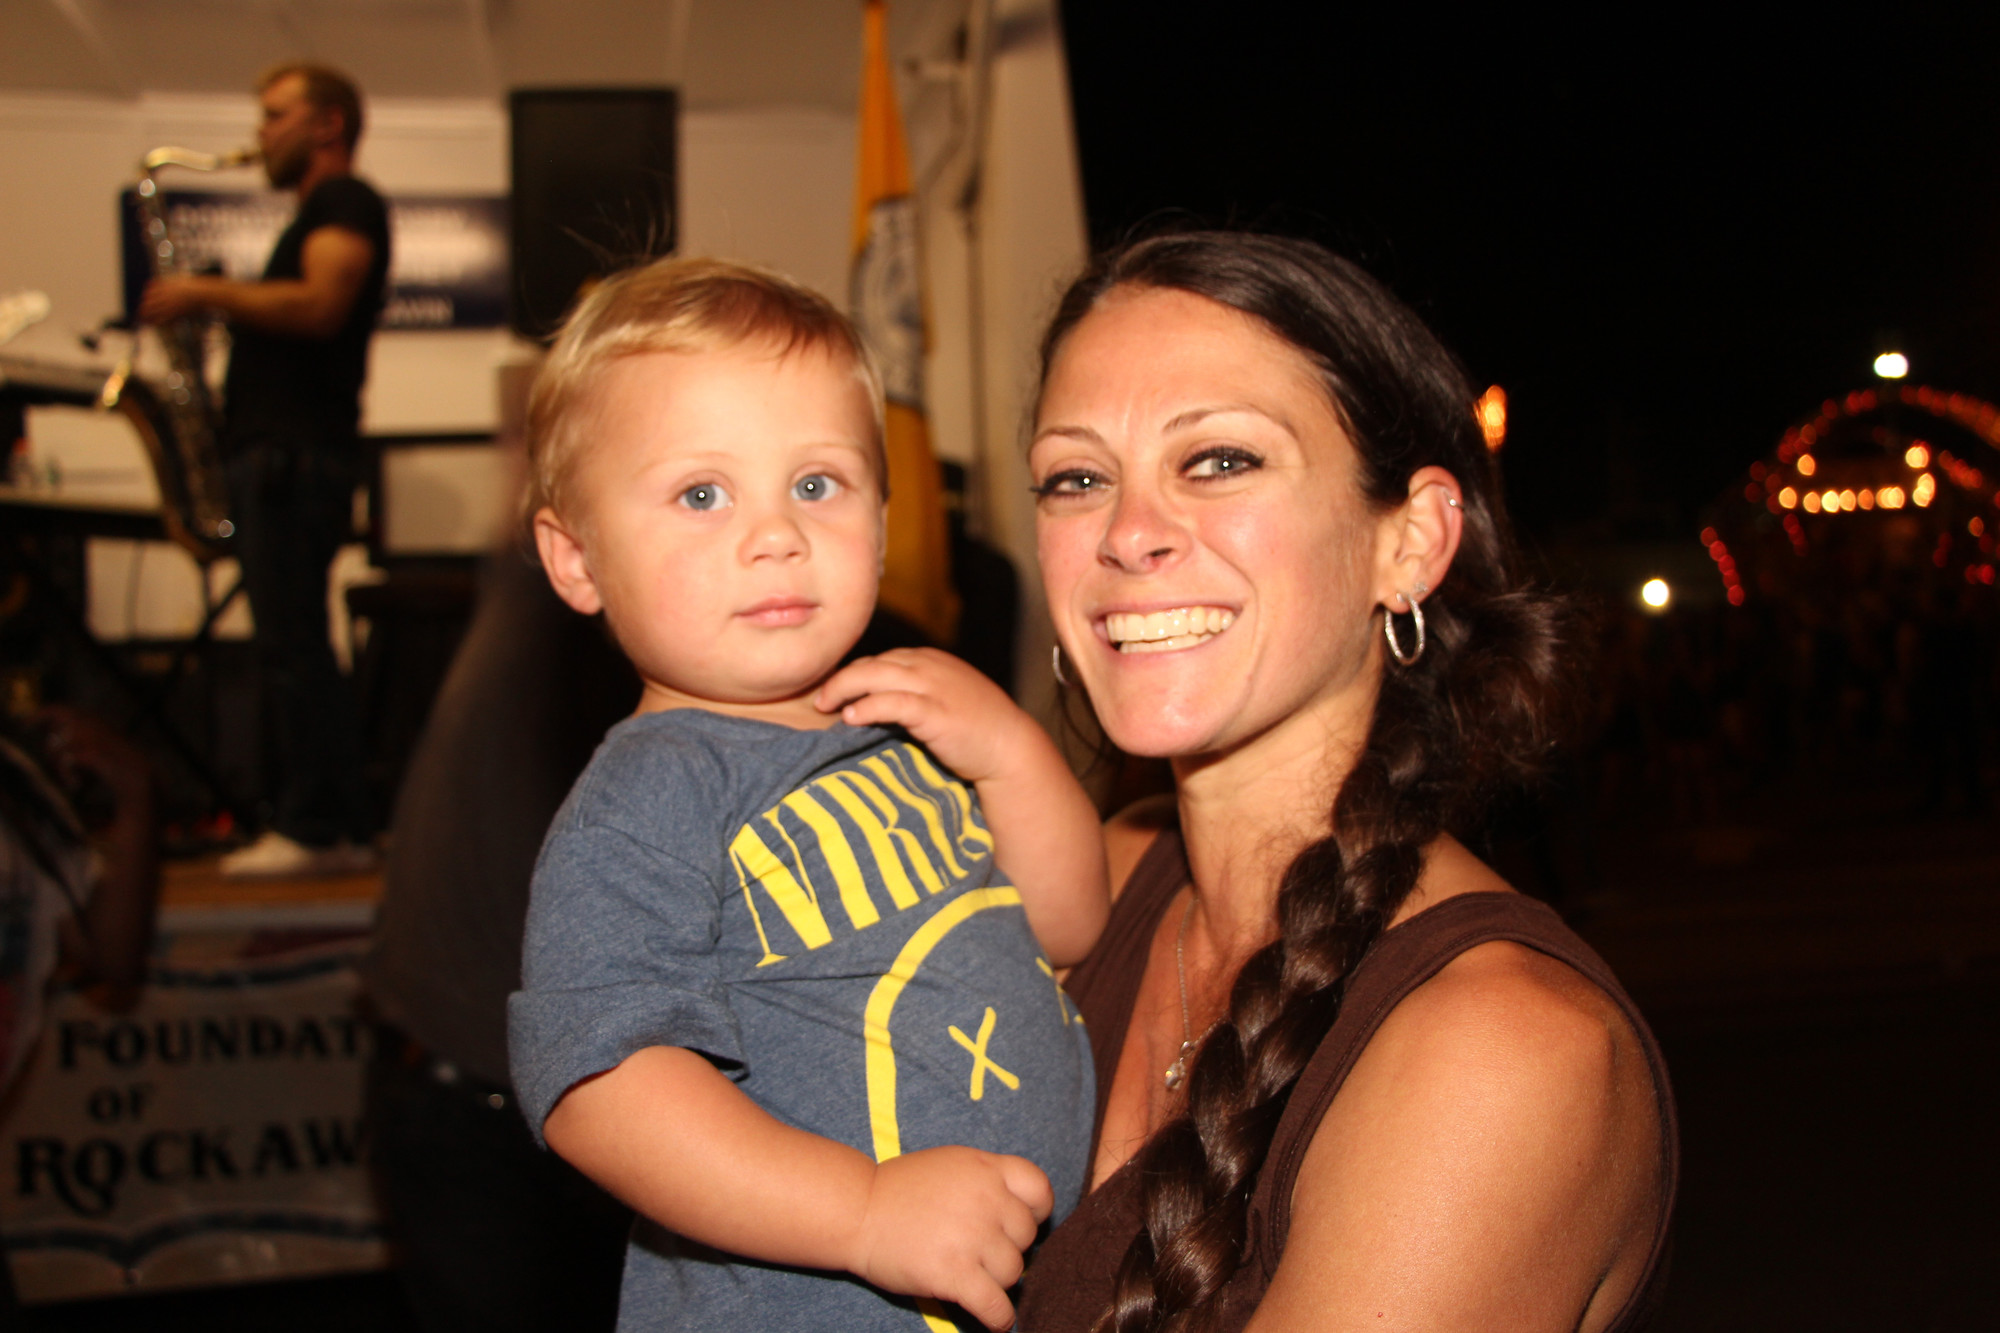 Jacqui Manasi with her son Riggs (1 1/2) were singing the songs of Bruce Springsteen, Dancing and having a great time.